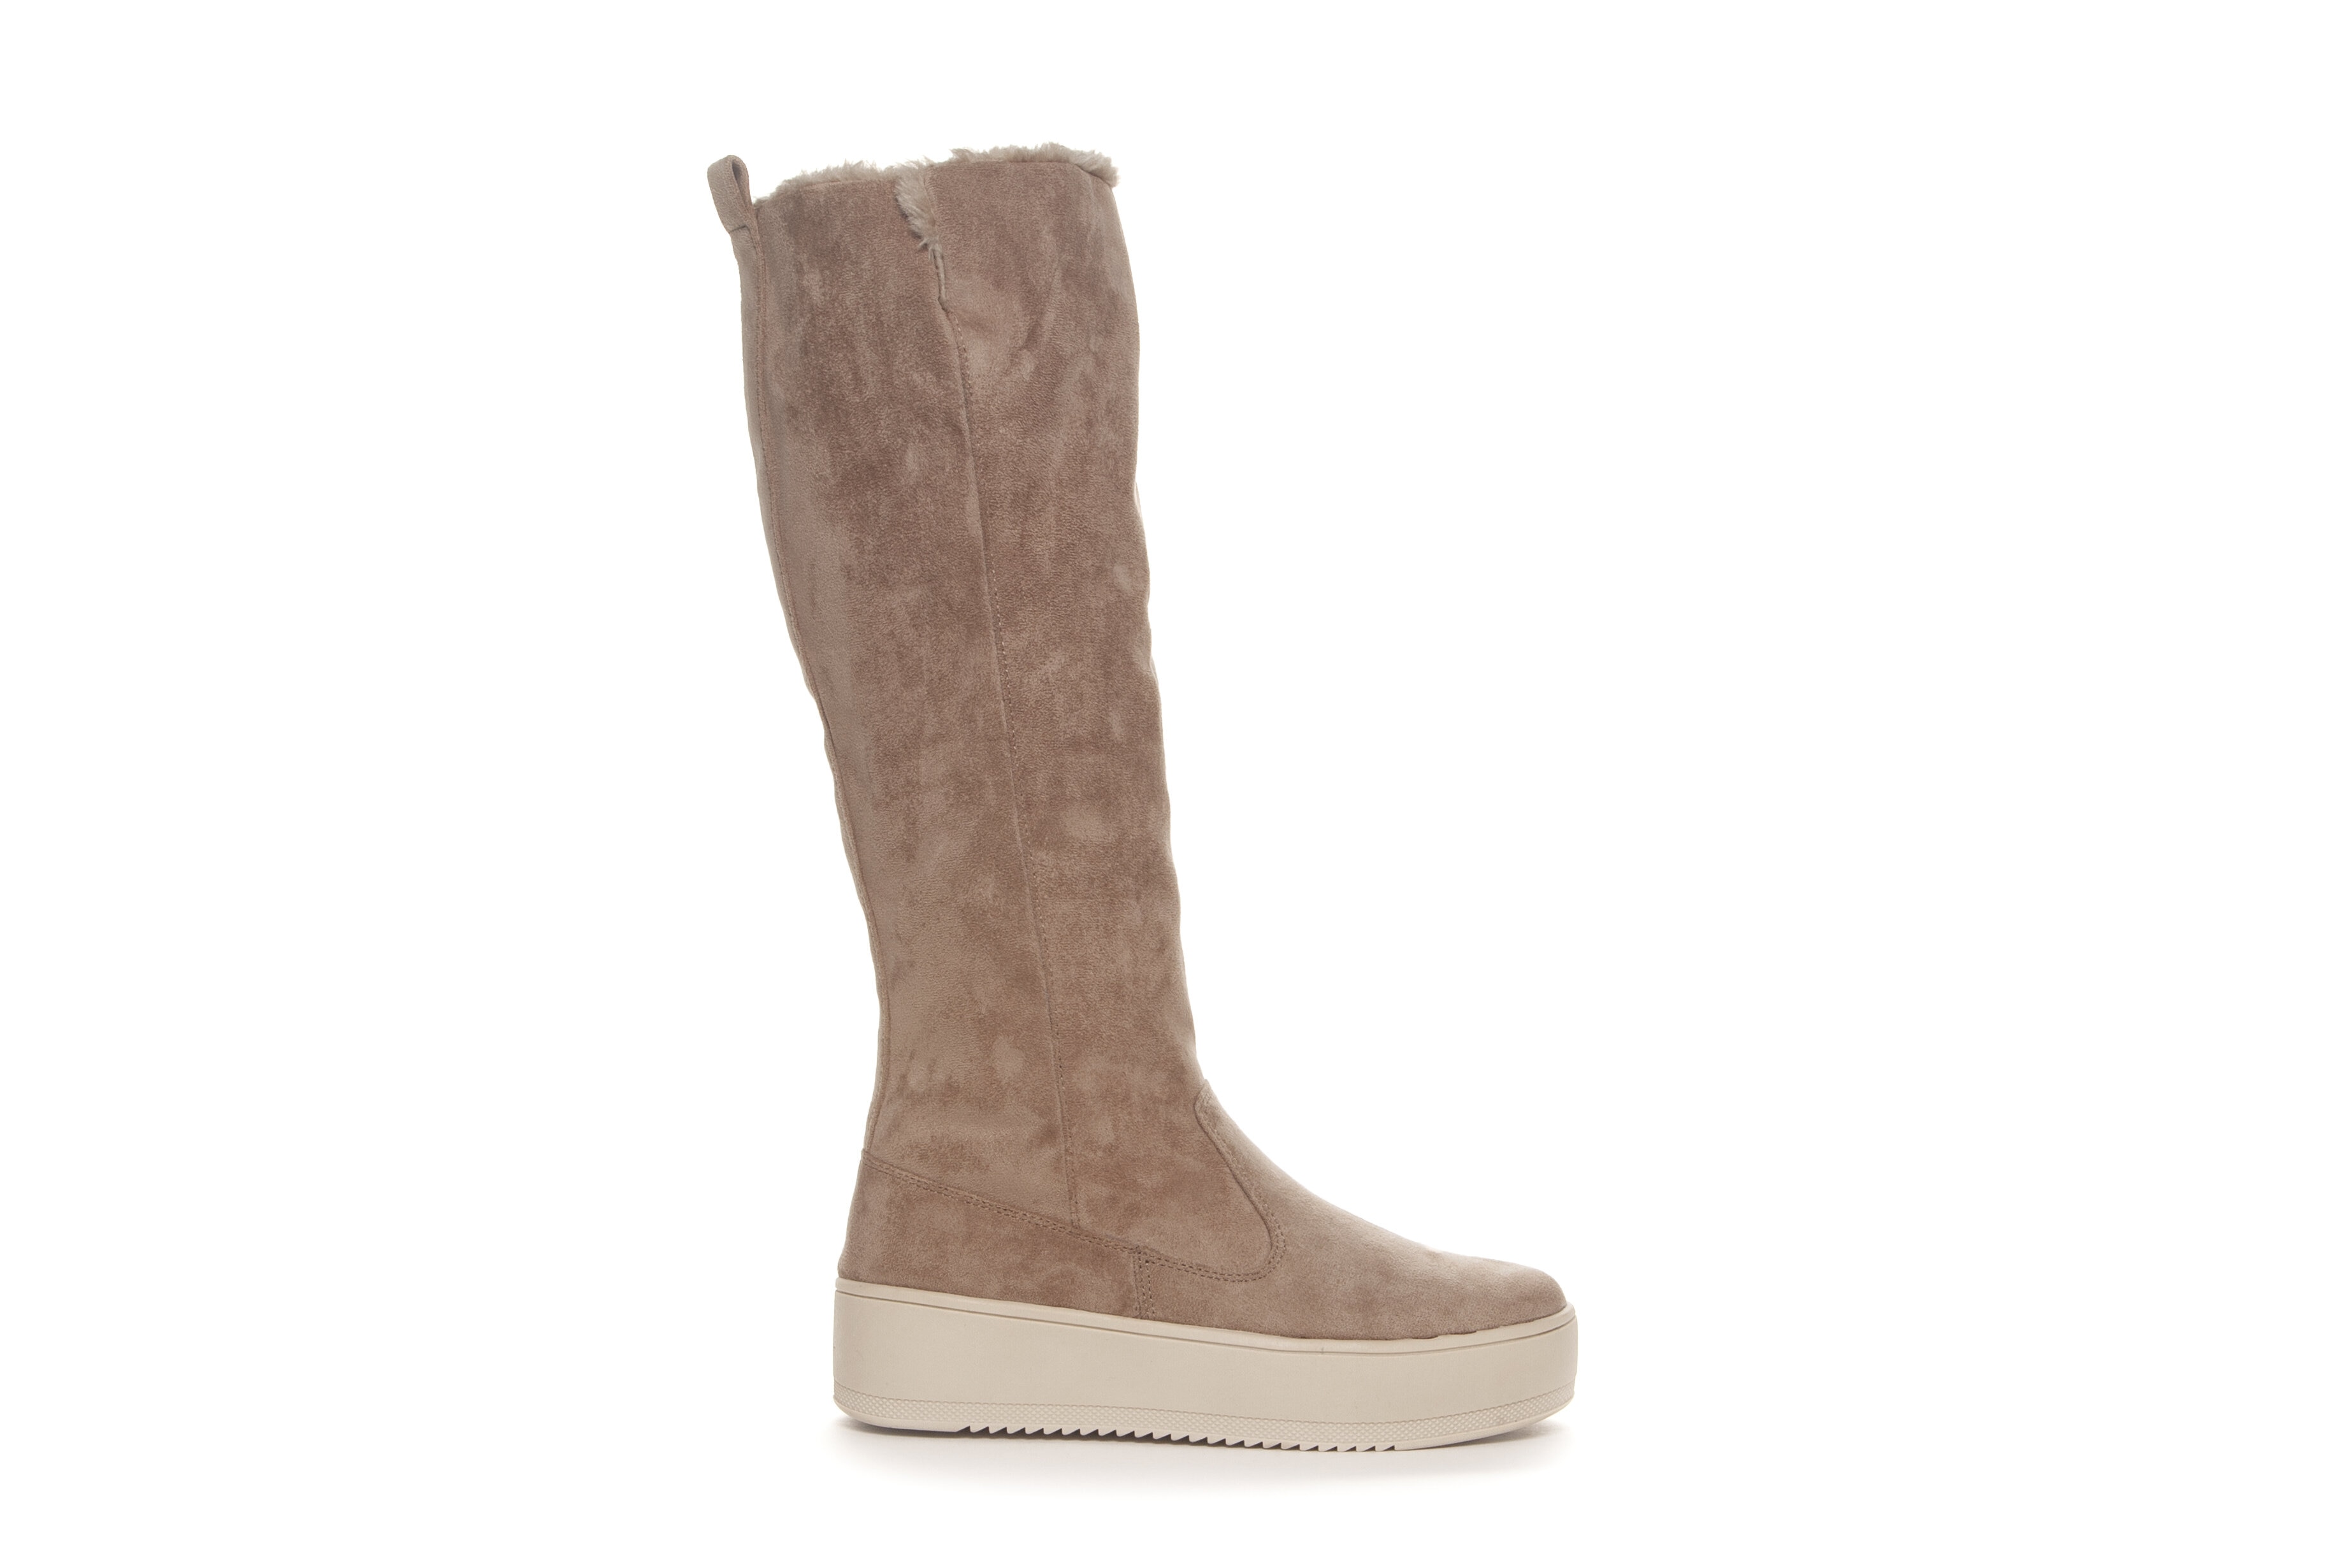 High boots in suede imitation - Beige